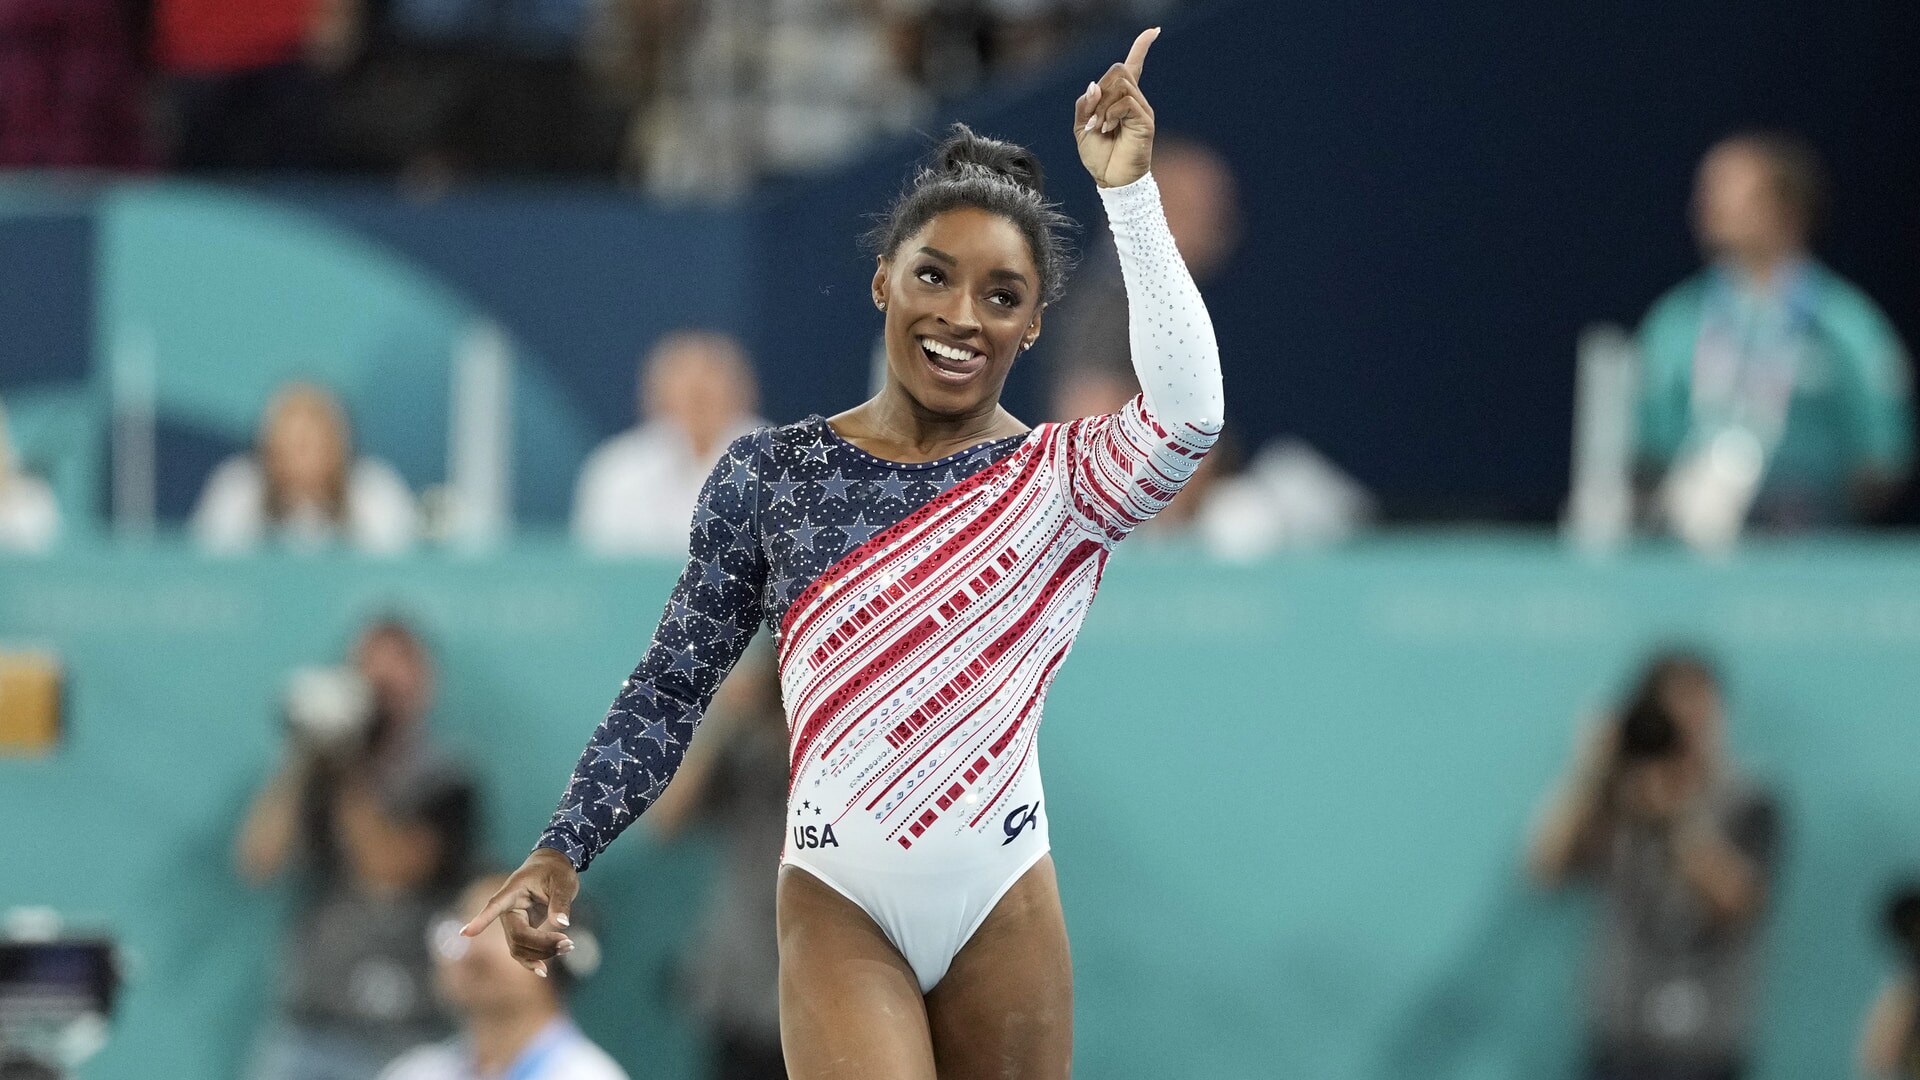 Simone Biles on competing in another Olympics: ‘Never say never'